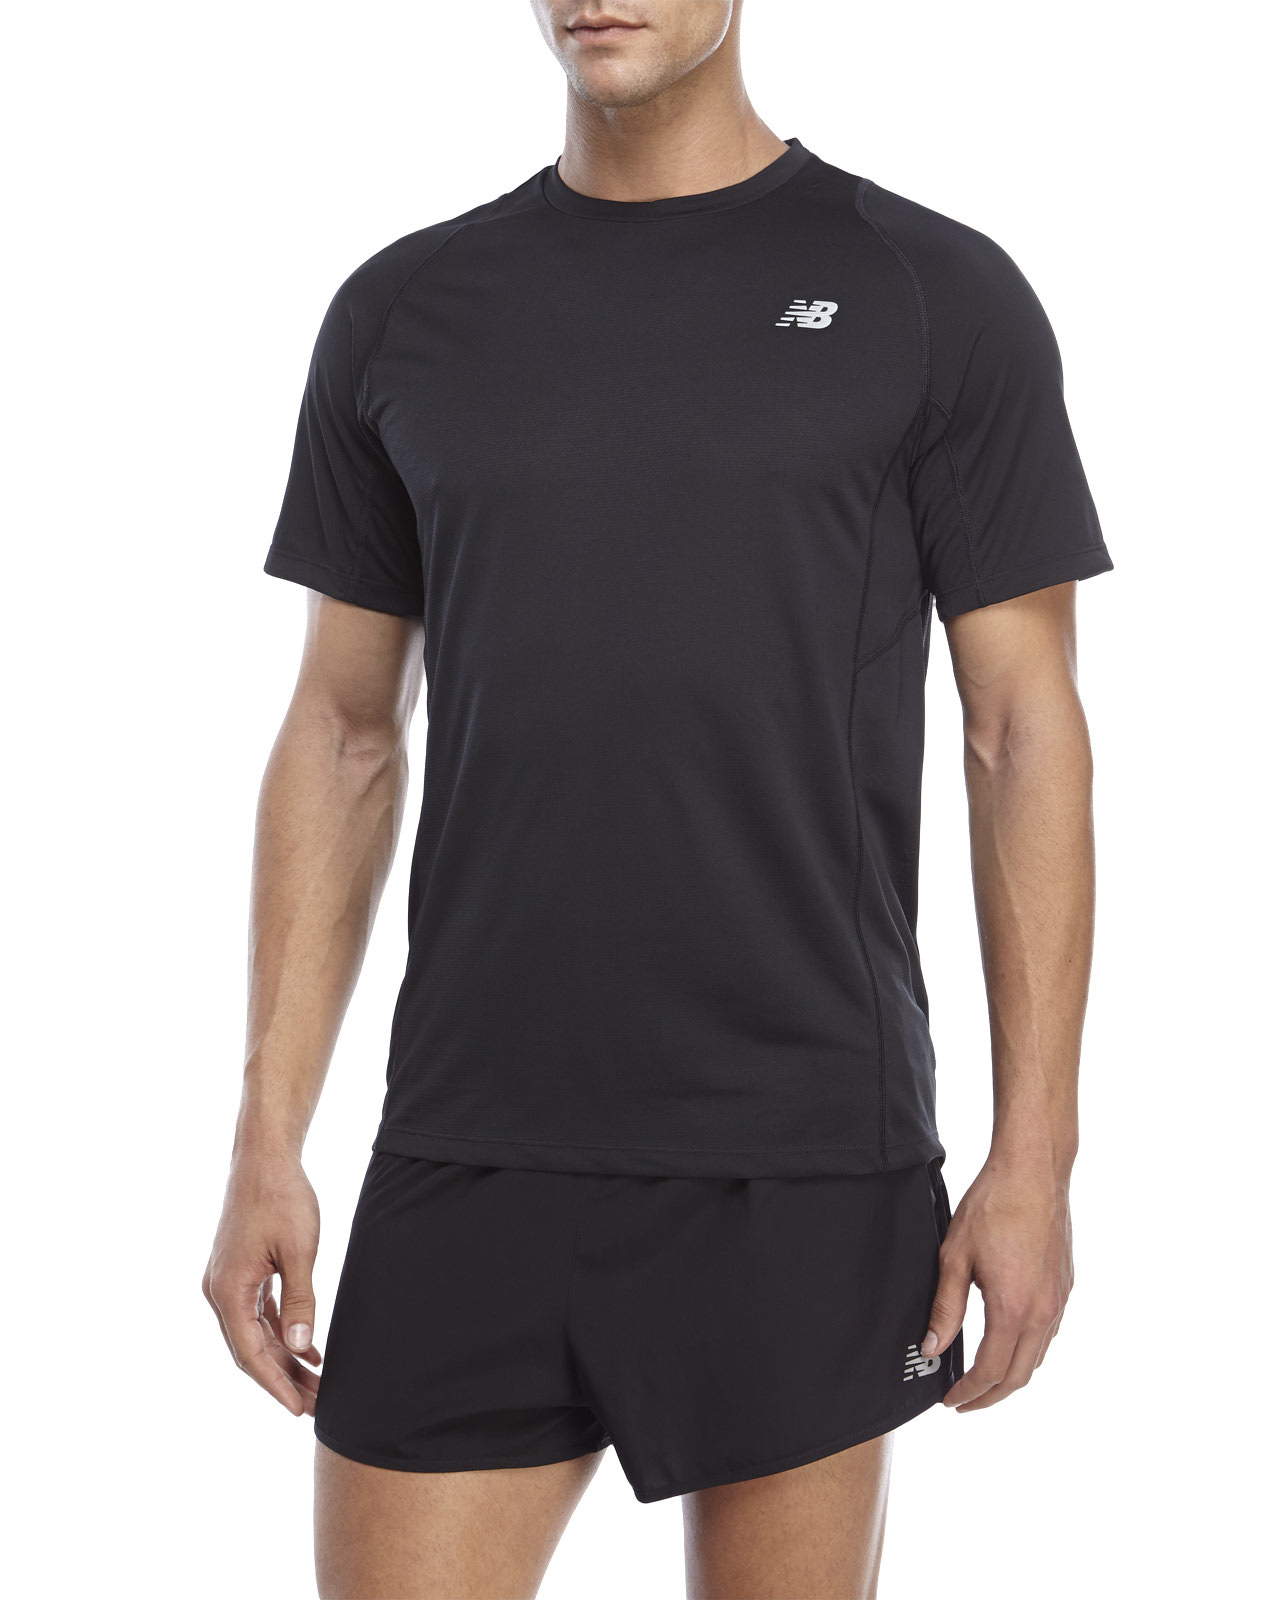 Lyst - New Balance Accelerate Run Performance Tee in Black for Men